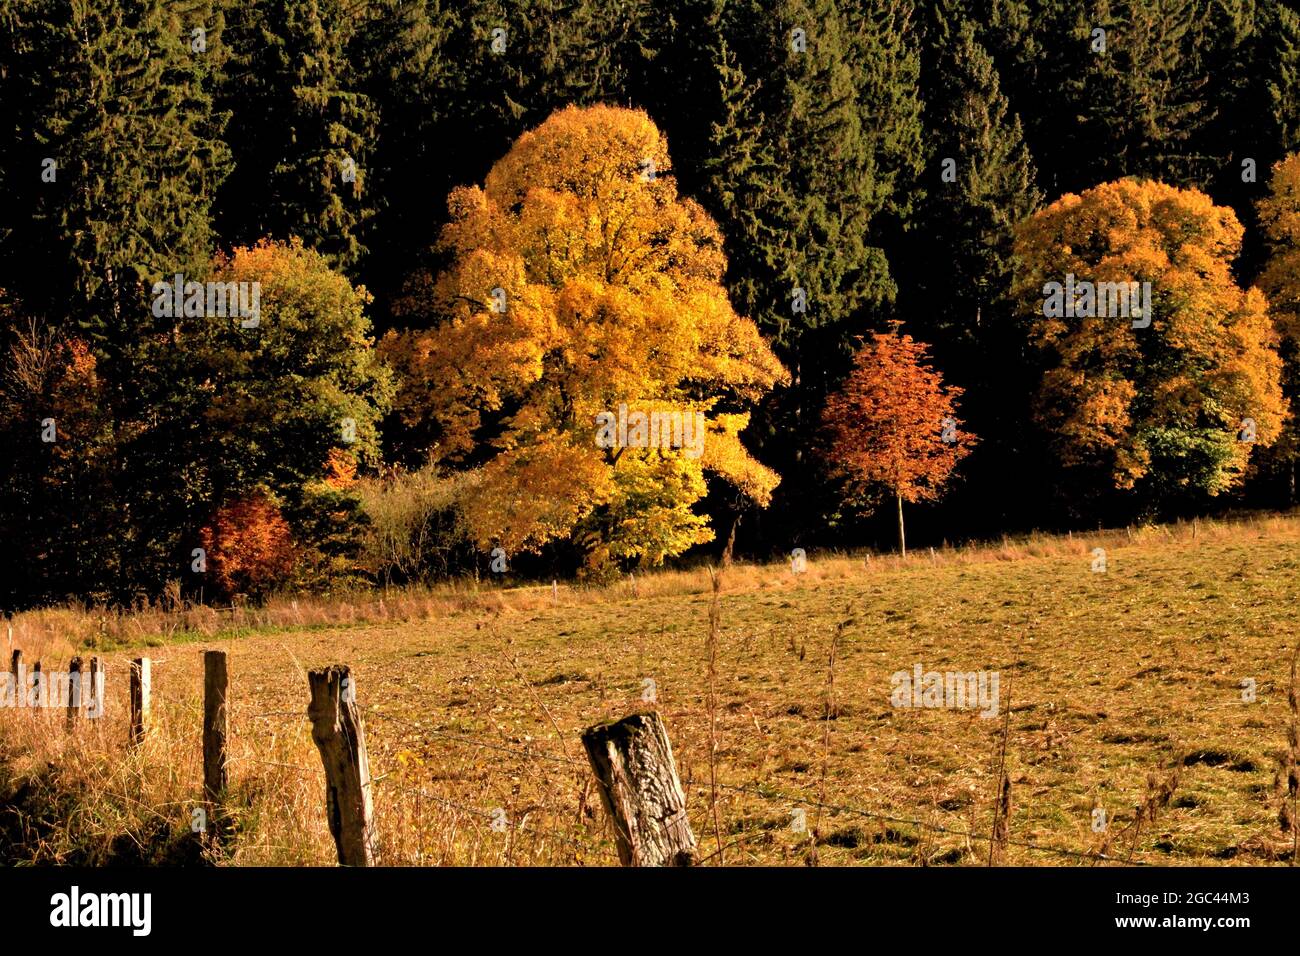 at the edge of the forest, golden-coloured trees glow behind a mown meadow Stock Photo